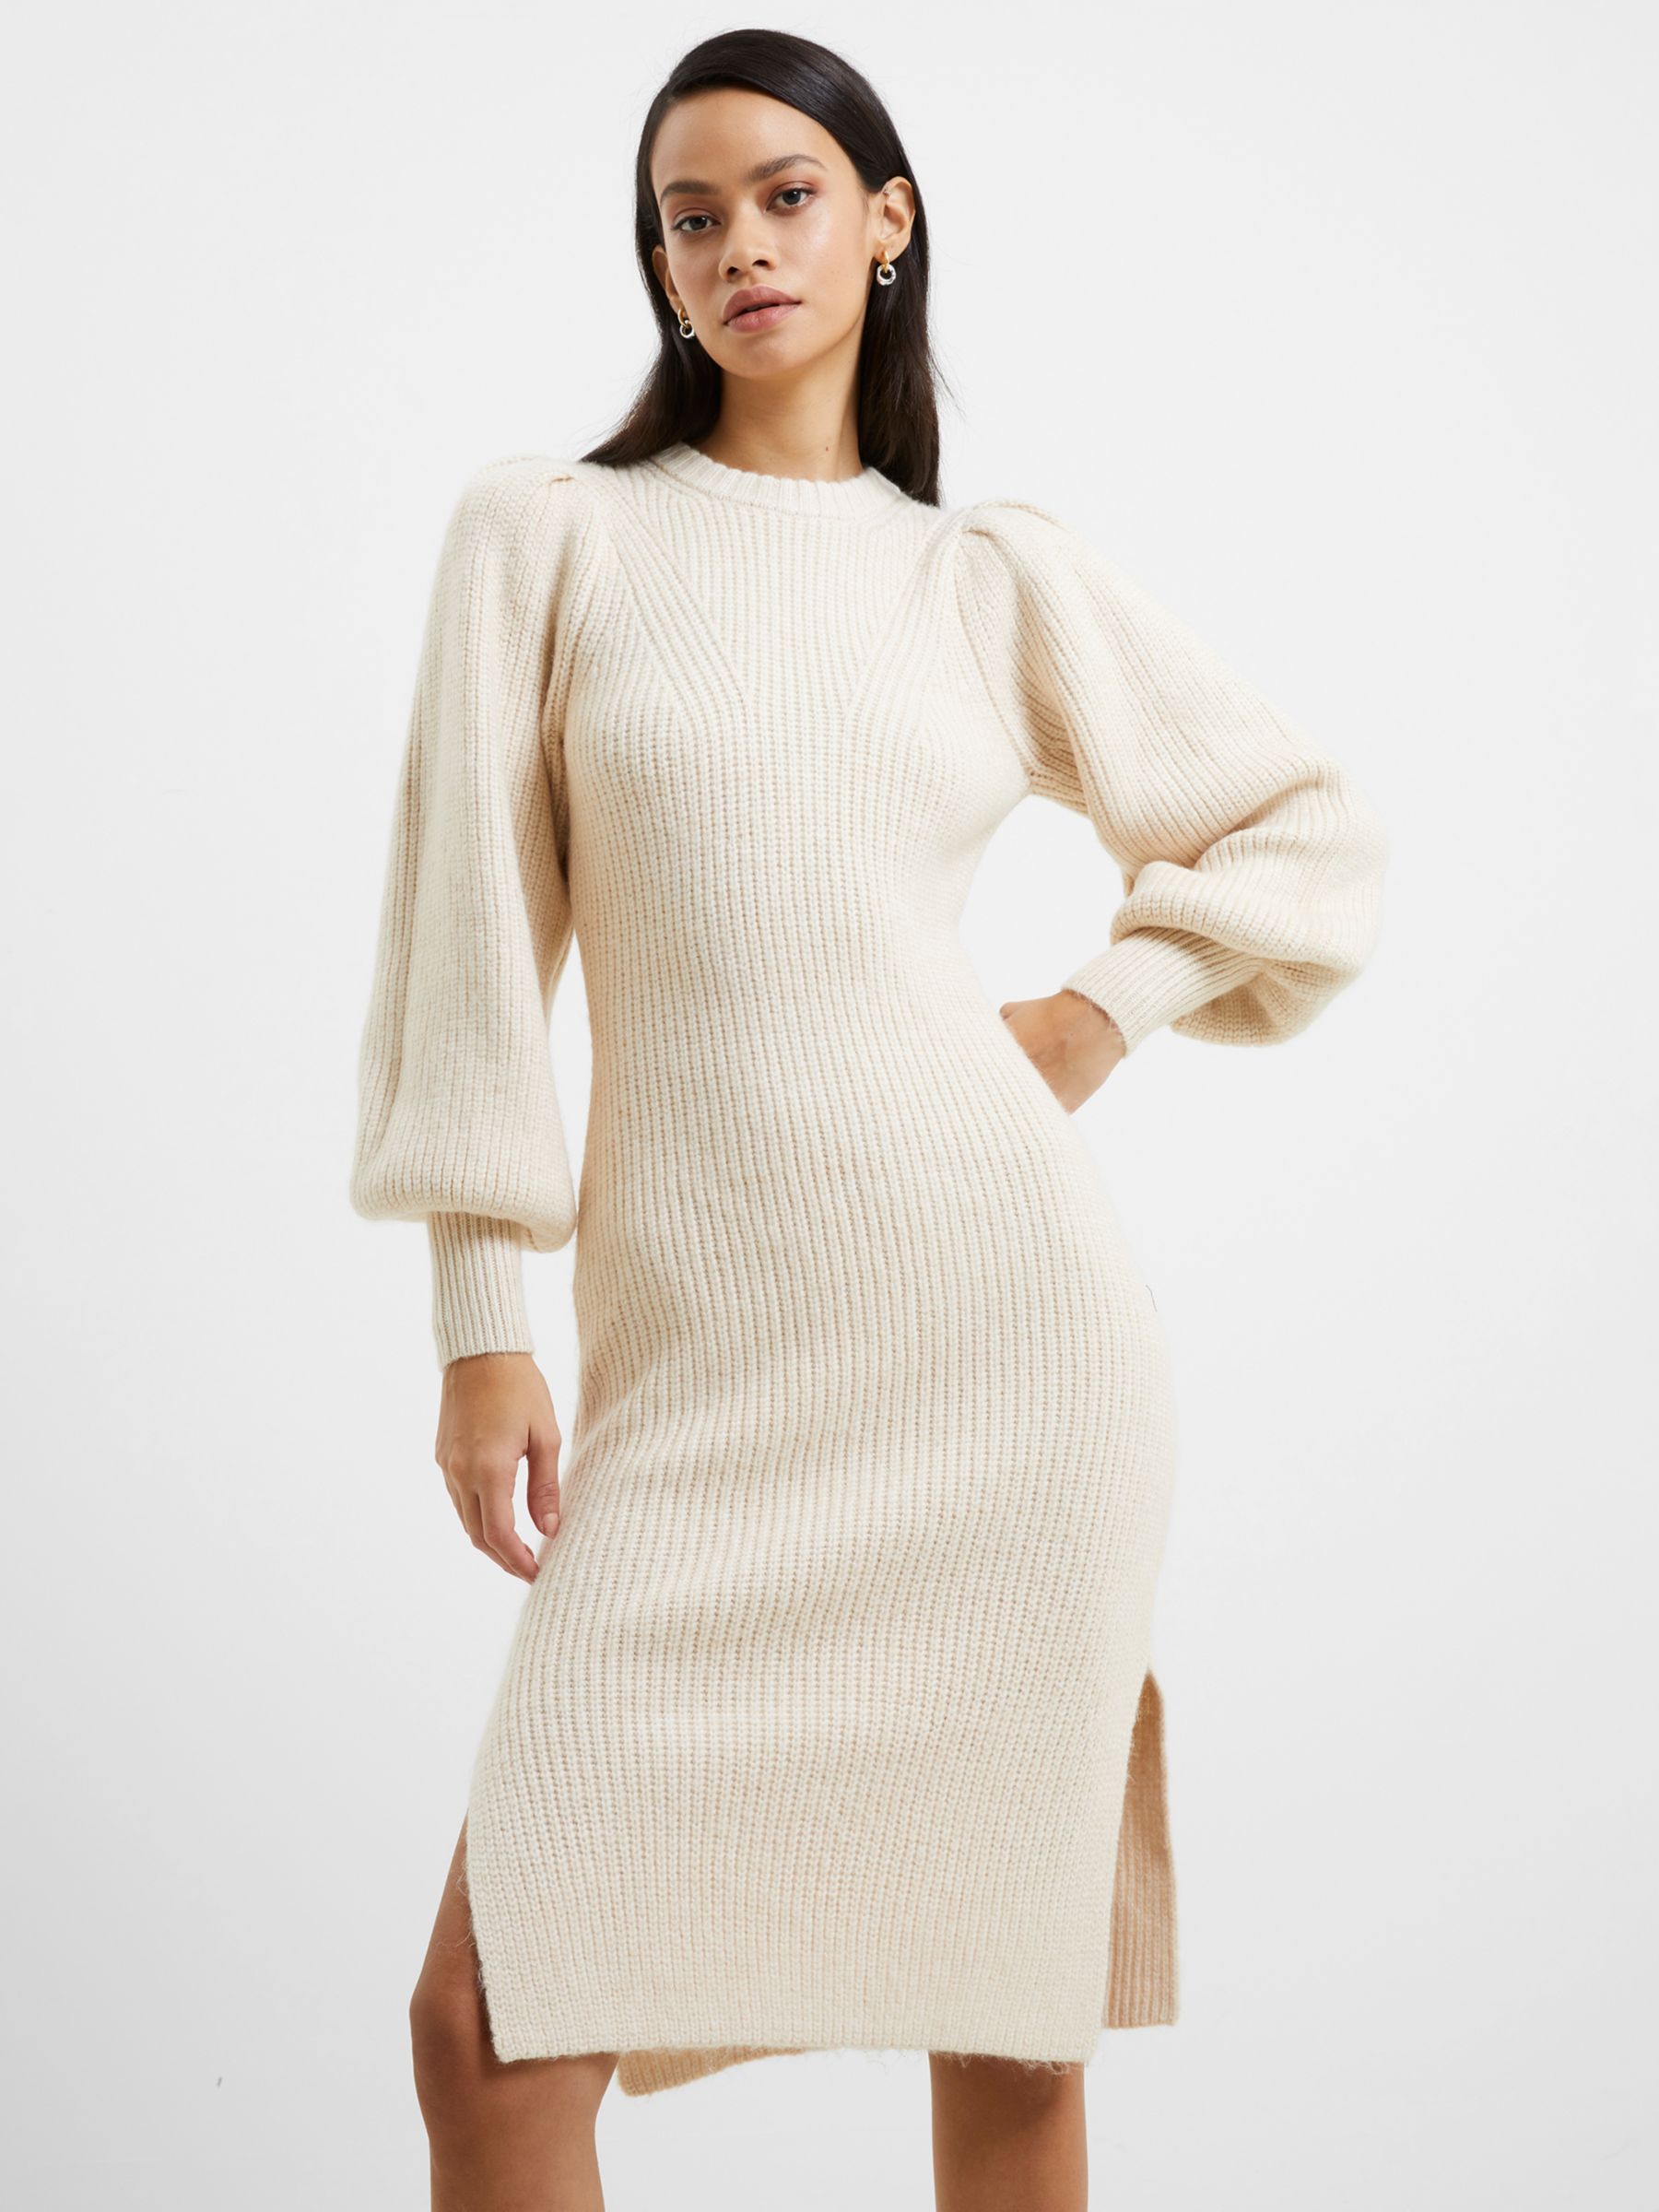 French Connection Kessy Puff Sleeve Dress, Oatmeal, M